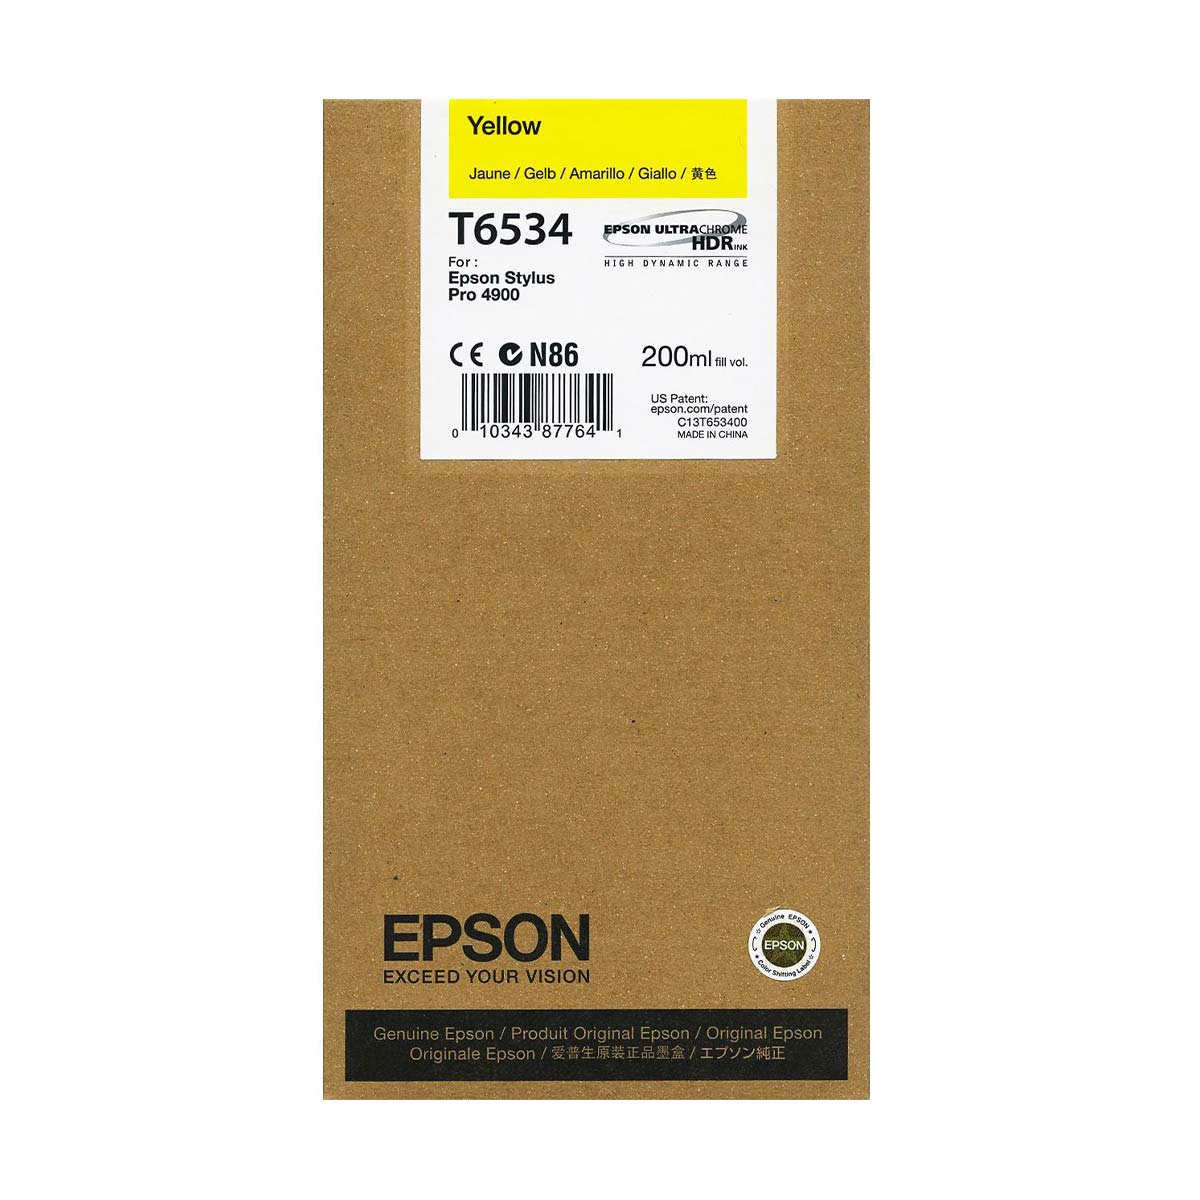 Epson T6534 4900 Ultrachrome Ink HDR 200ml Yellow